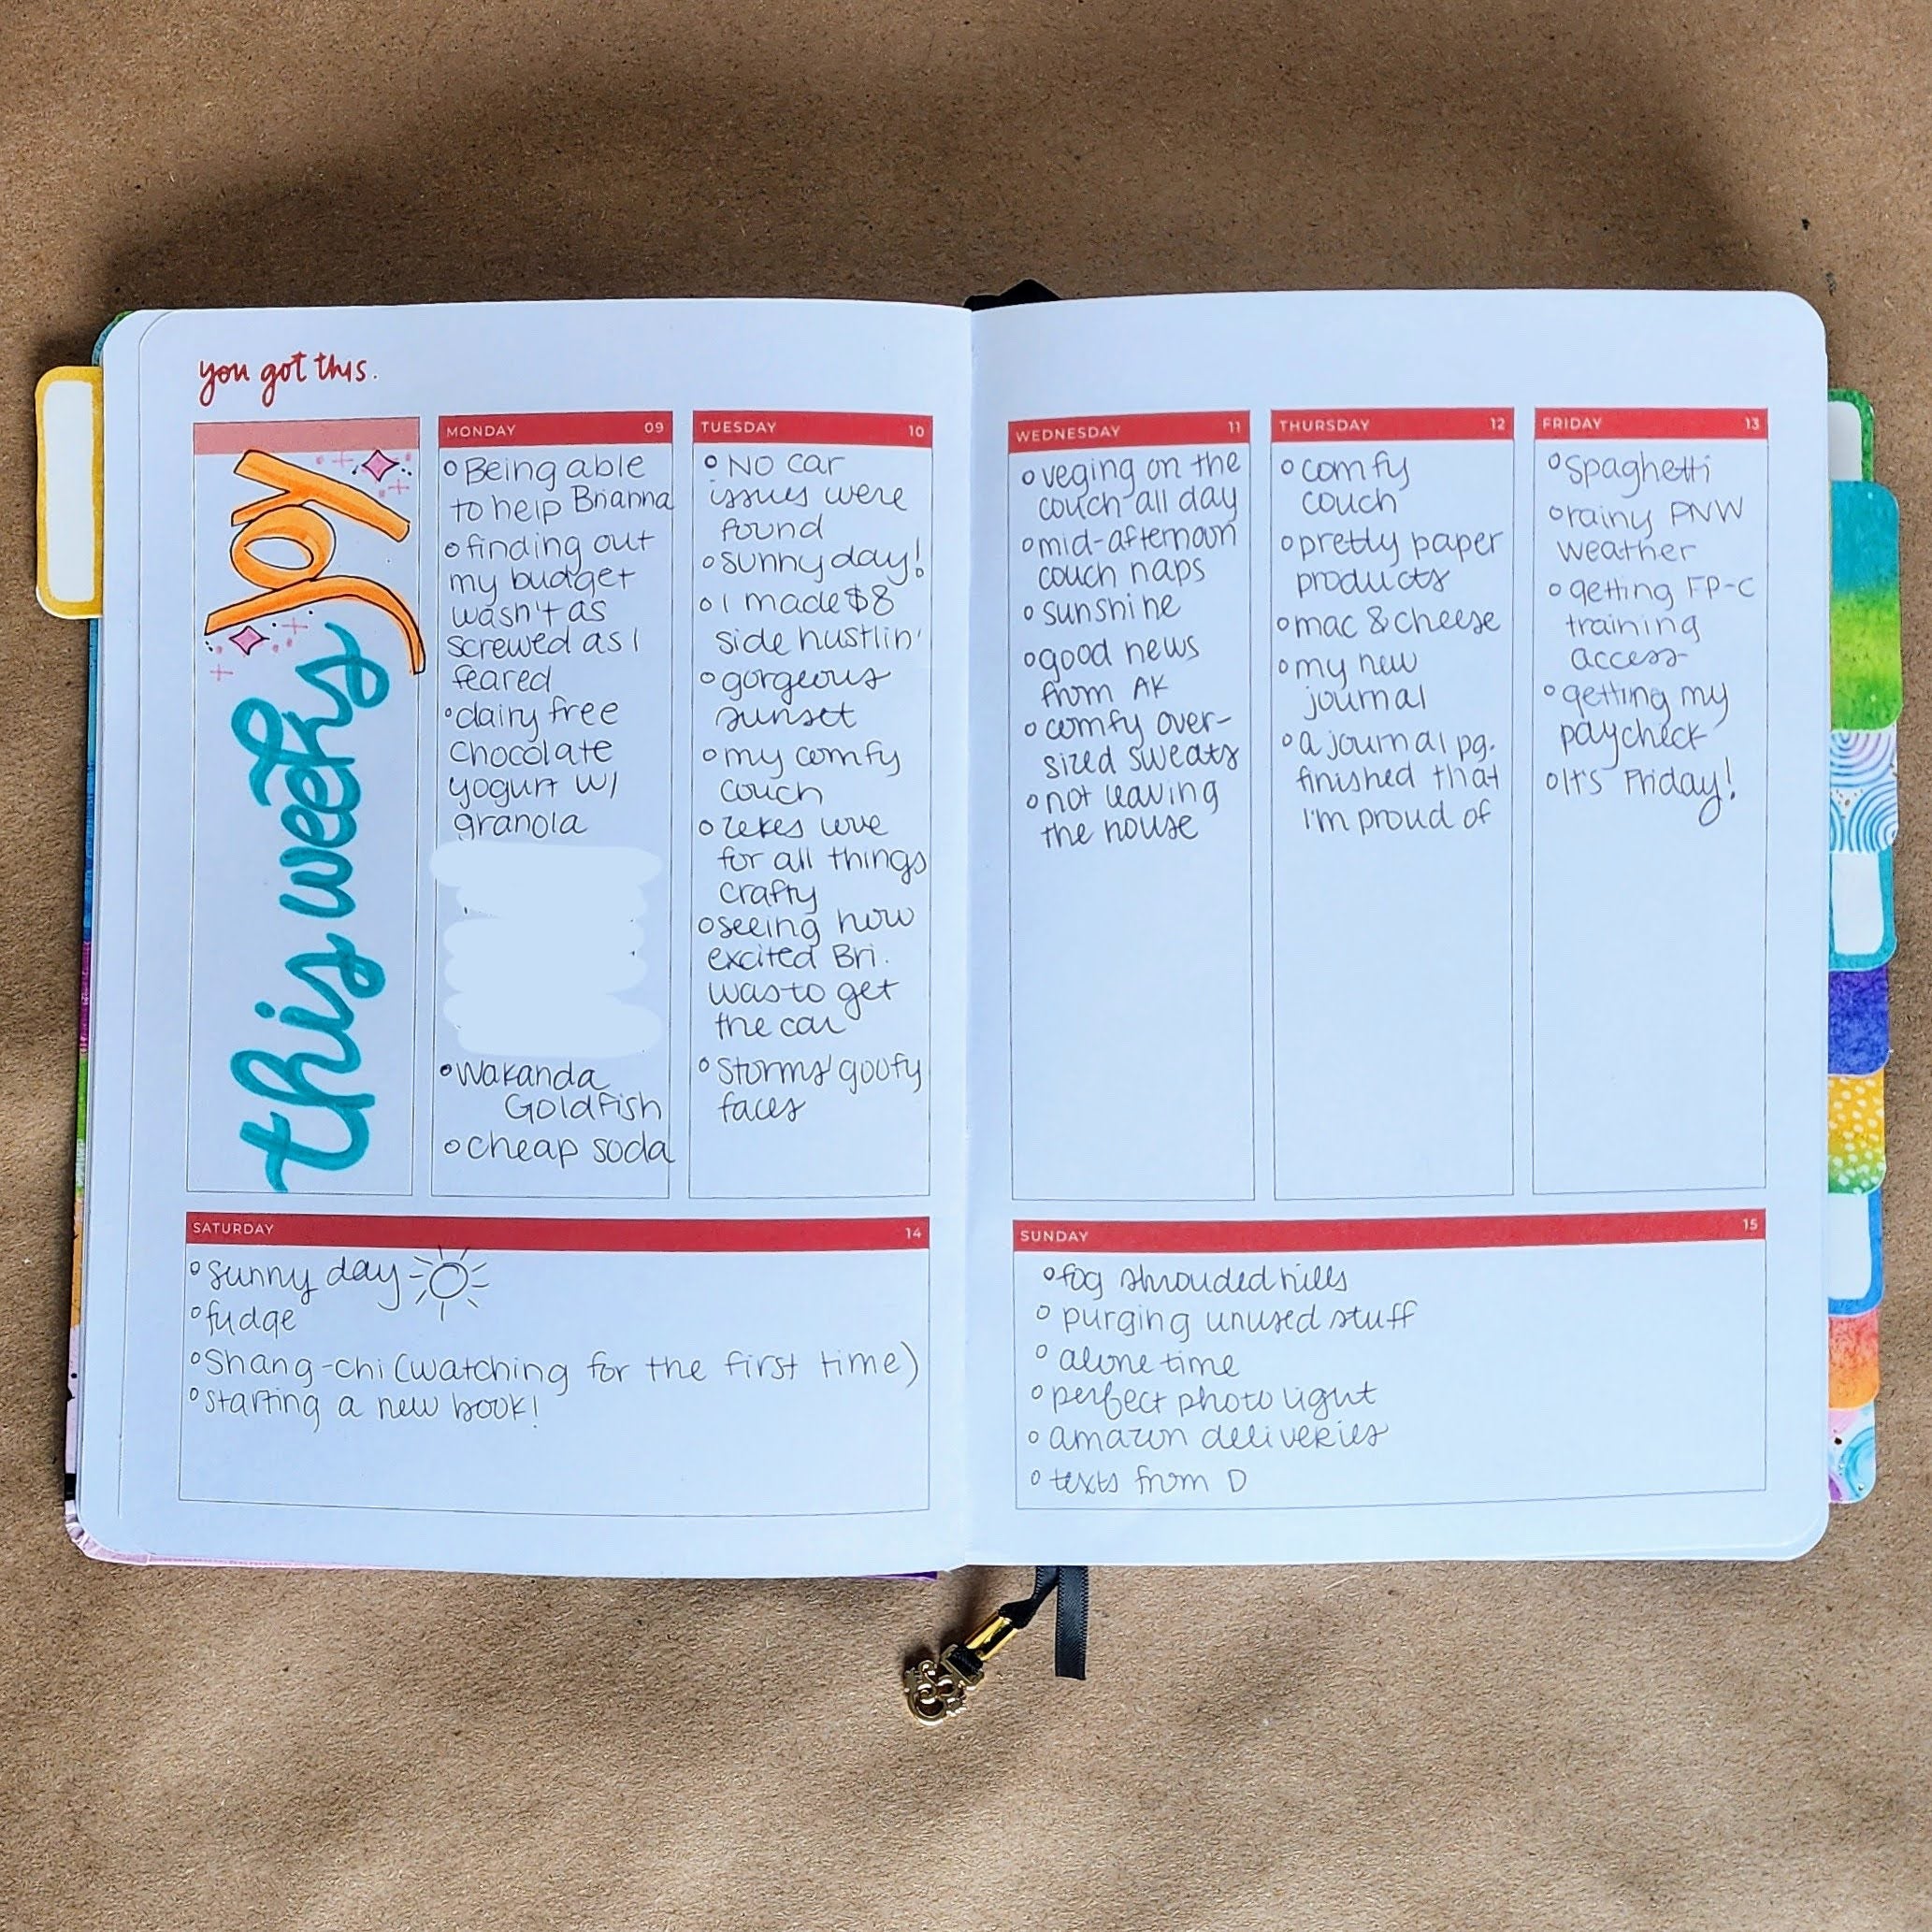 Easy things to draw: 100+ Cool ideas to doodle on your bullet journal